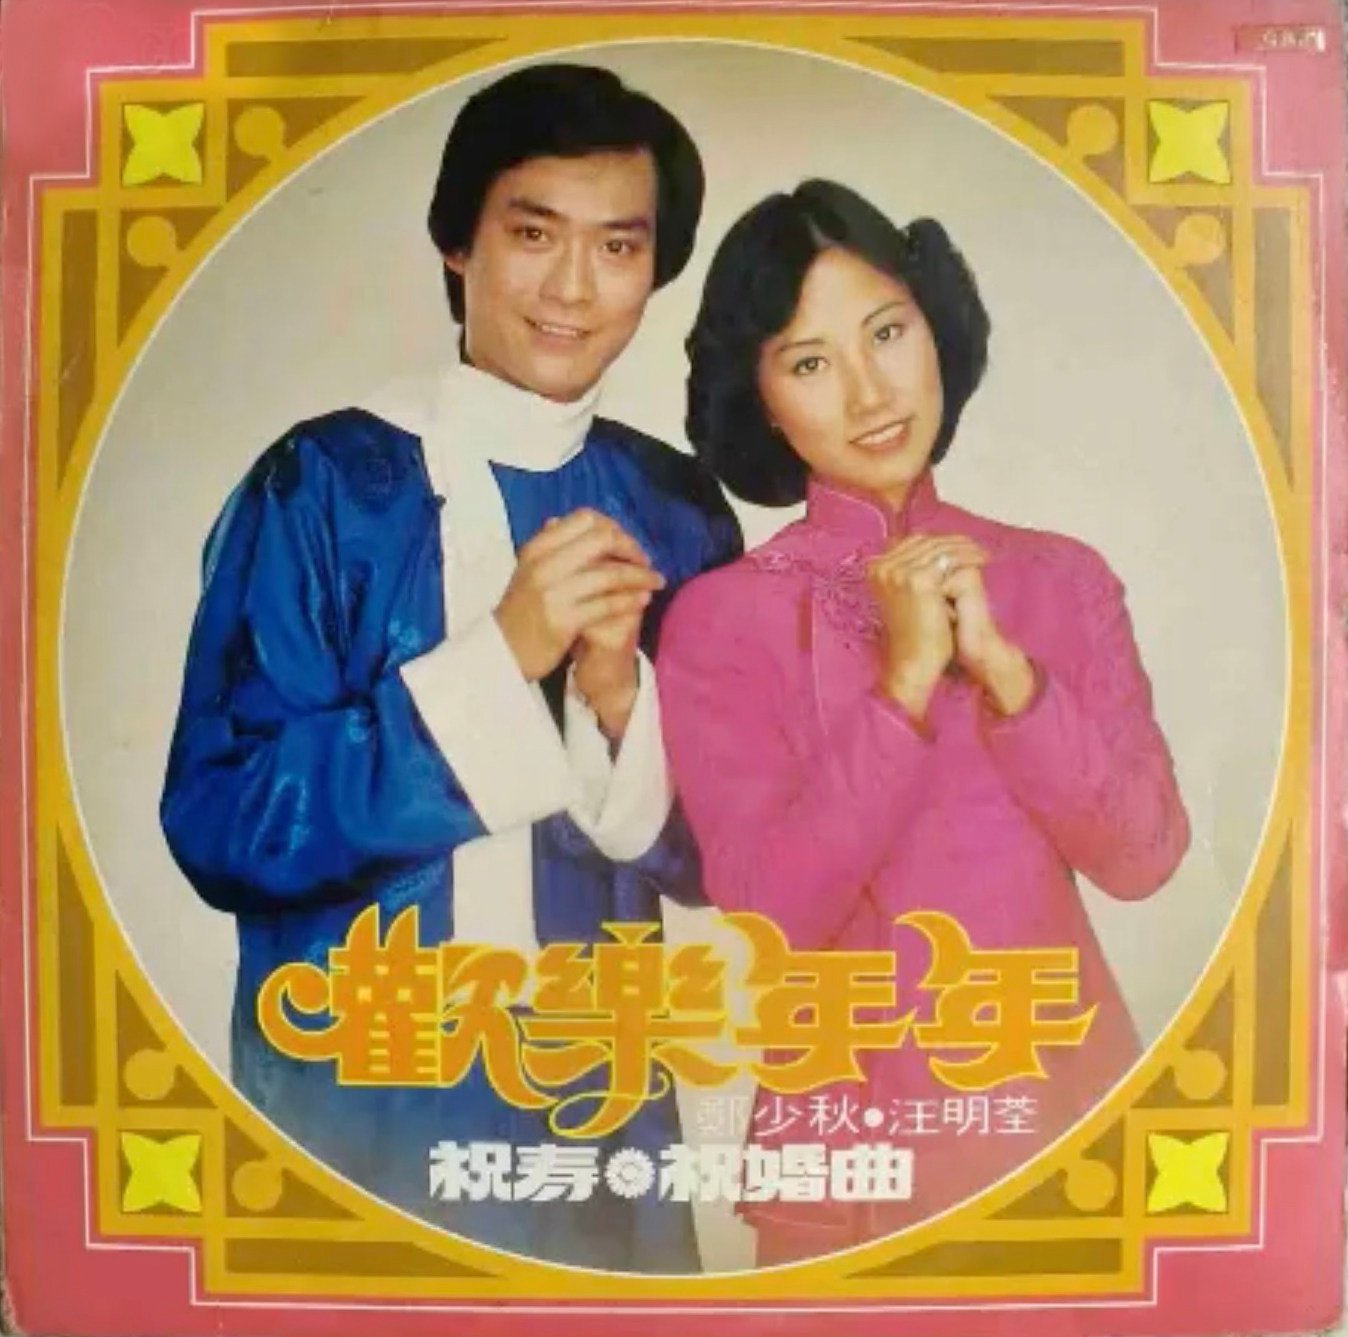 Joyful Years, the 1977 song by Adam Cheng and Liza Wang, is among the most popular Lunar New Year songs. We look at this and four more favourite songs as the Year of the Dragon approaches.